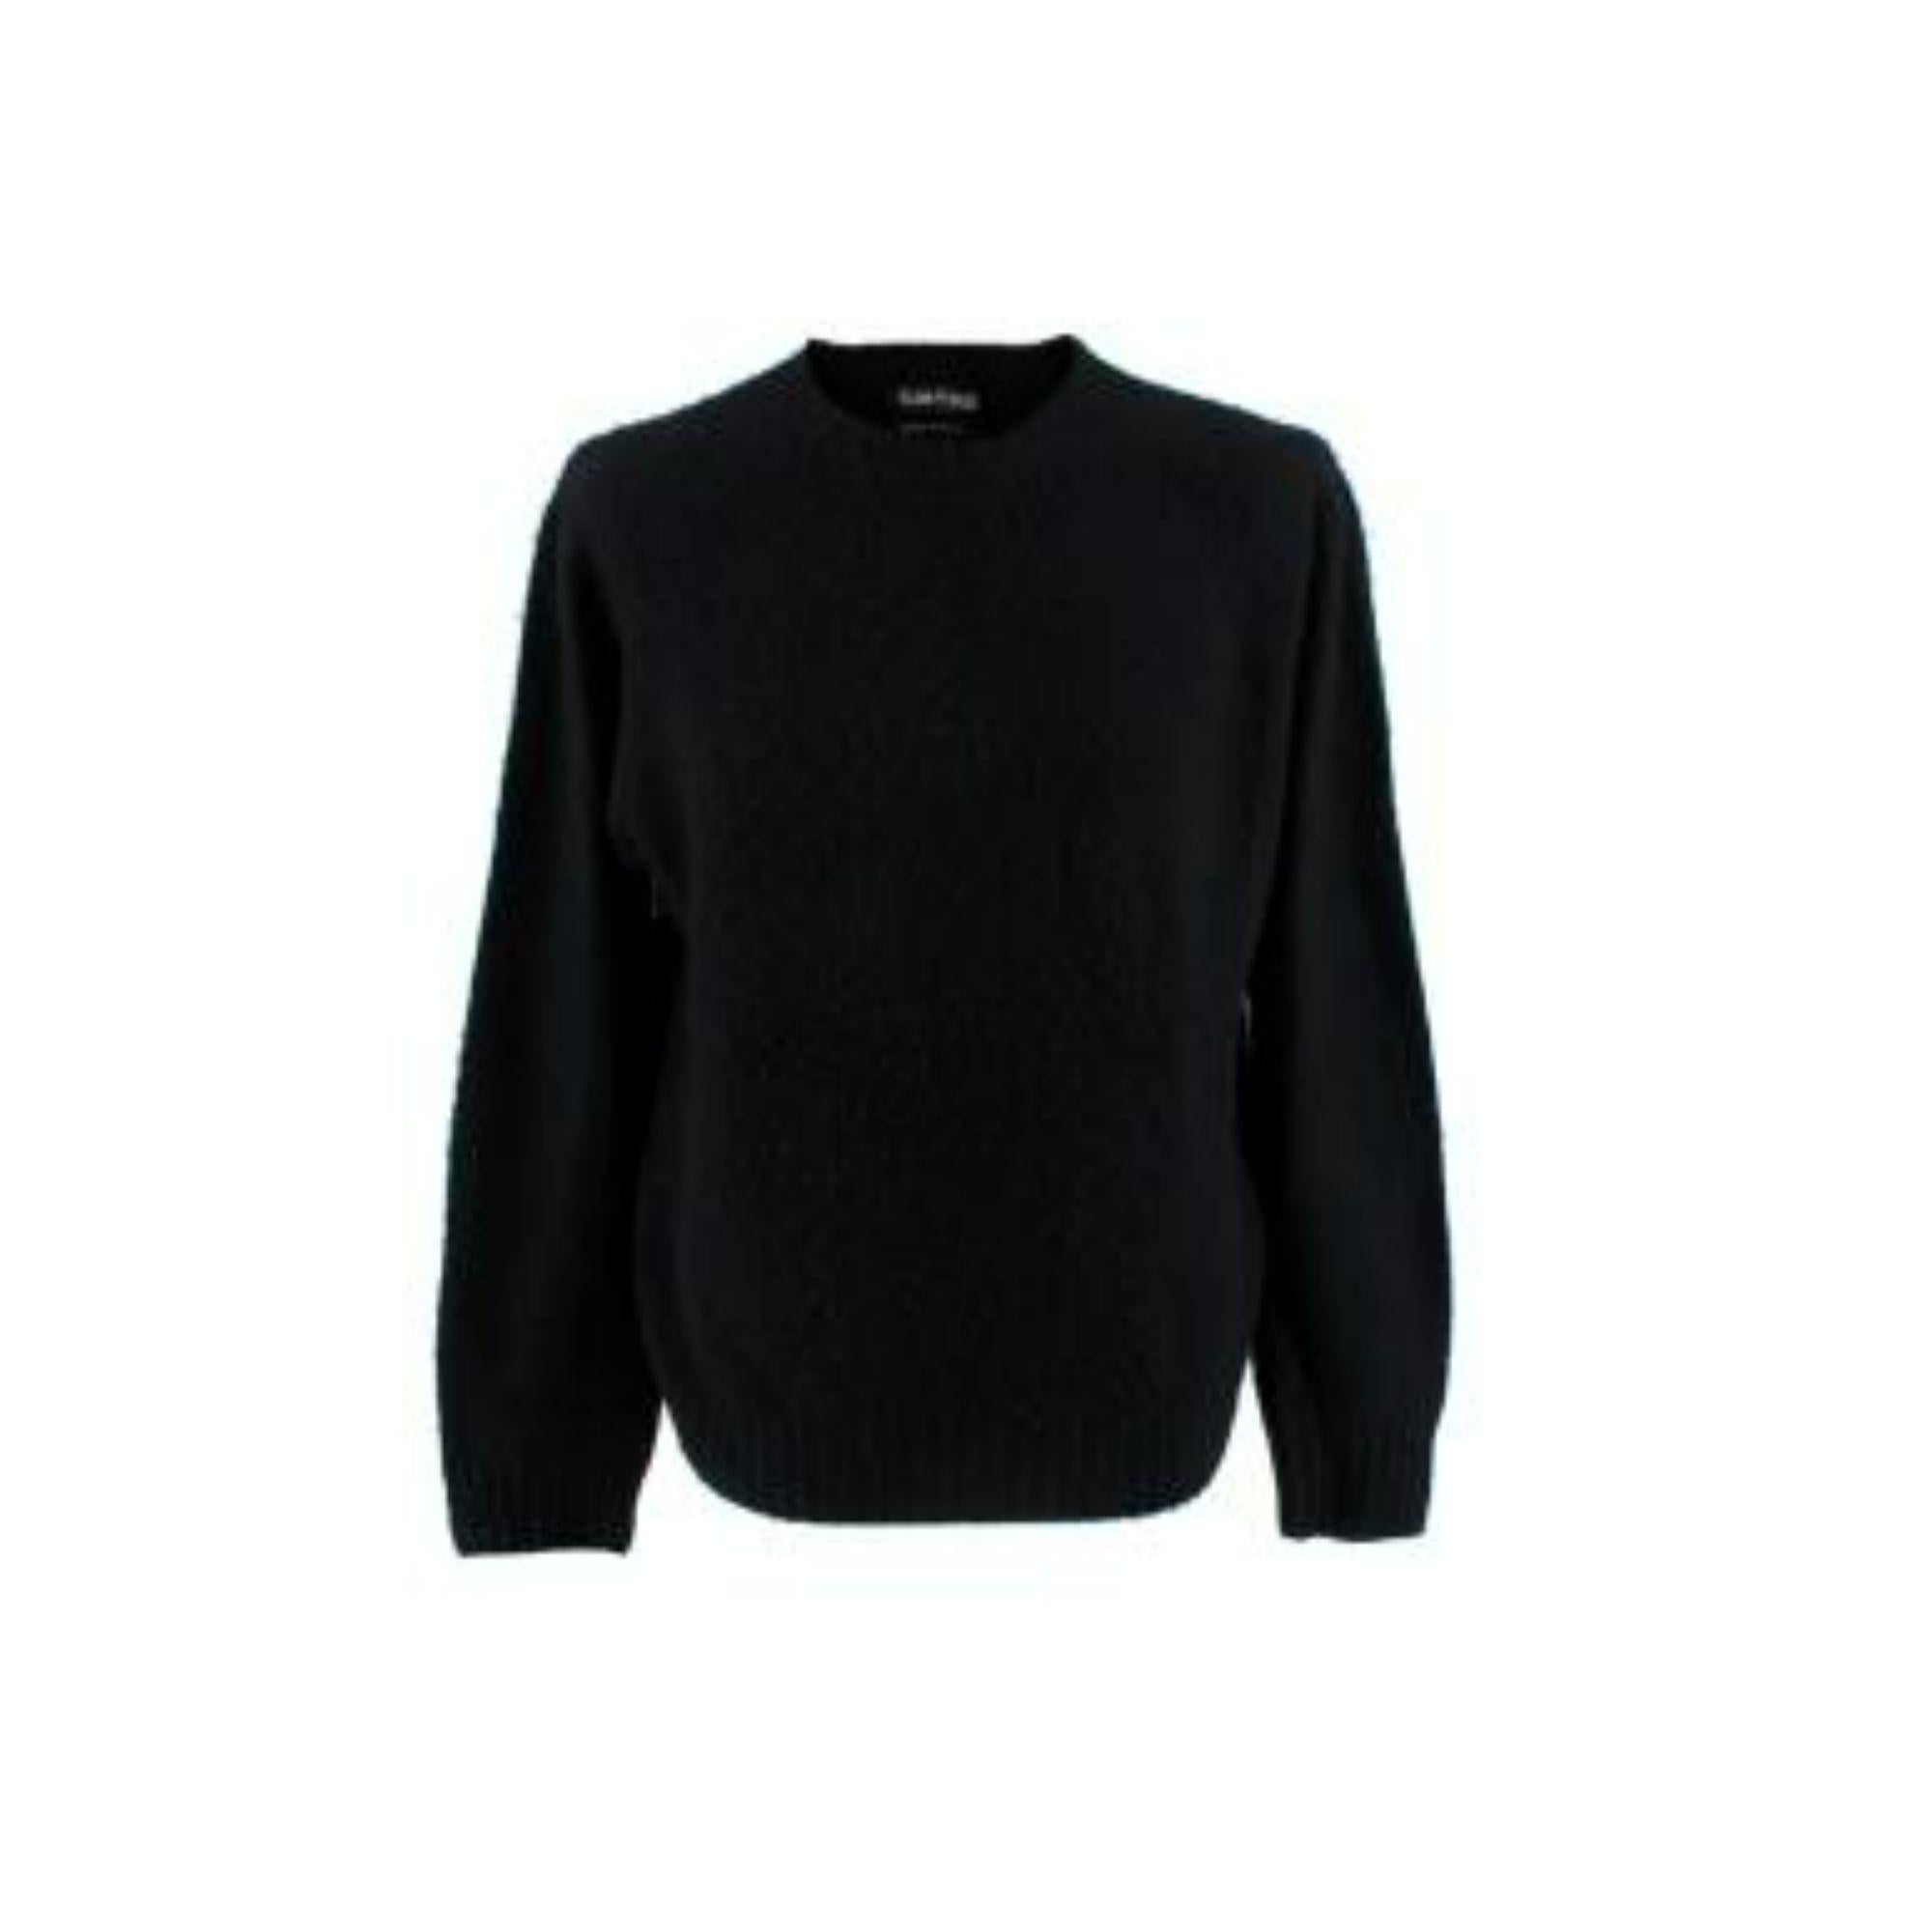 Tom Ford Black Sweater

- Round neckline
- Ribbed cuffs, neck, and waist
- Light construction

Material
100% Cashmere

Made in Great Britain

9.5/10 Excellent condition

PLEASE NOTE, THESE ITEMS ARE PRE-OWNED AND MAY SHOW SIGNS OF BEING STORED EVEN